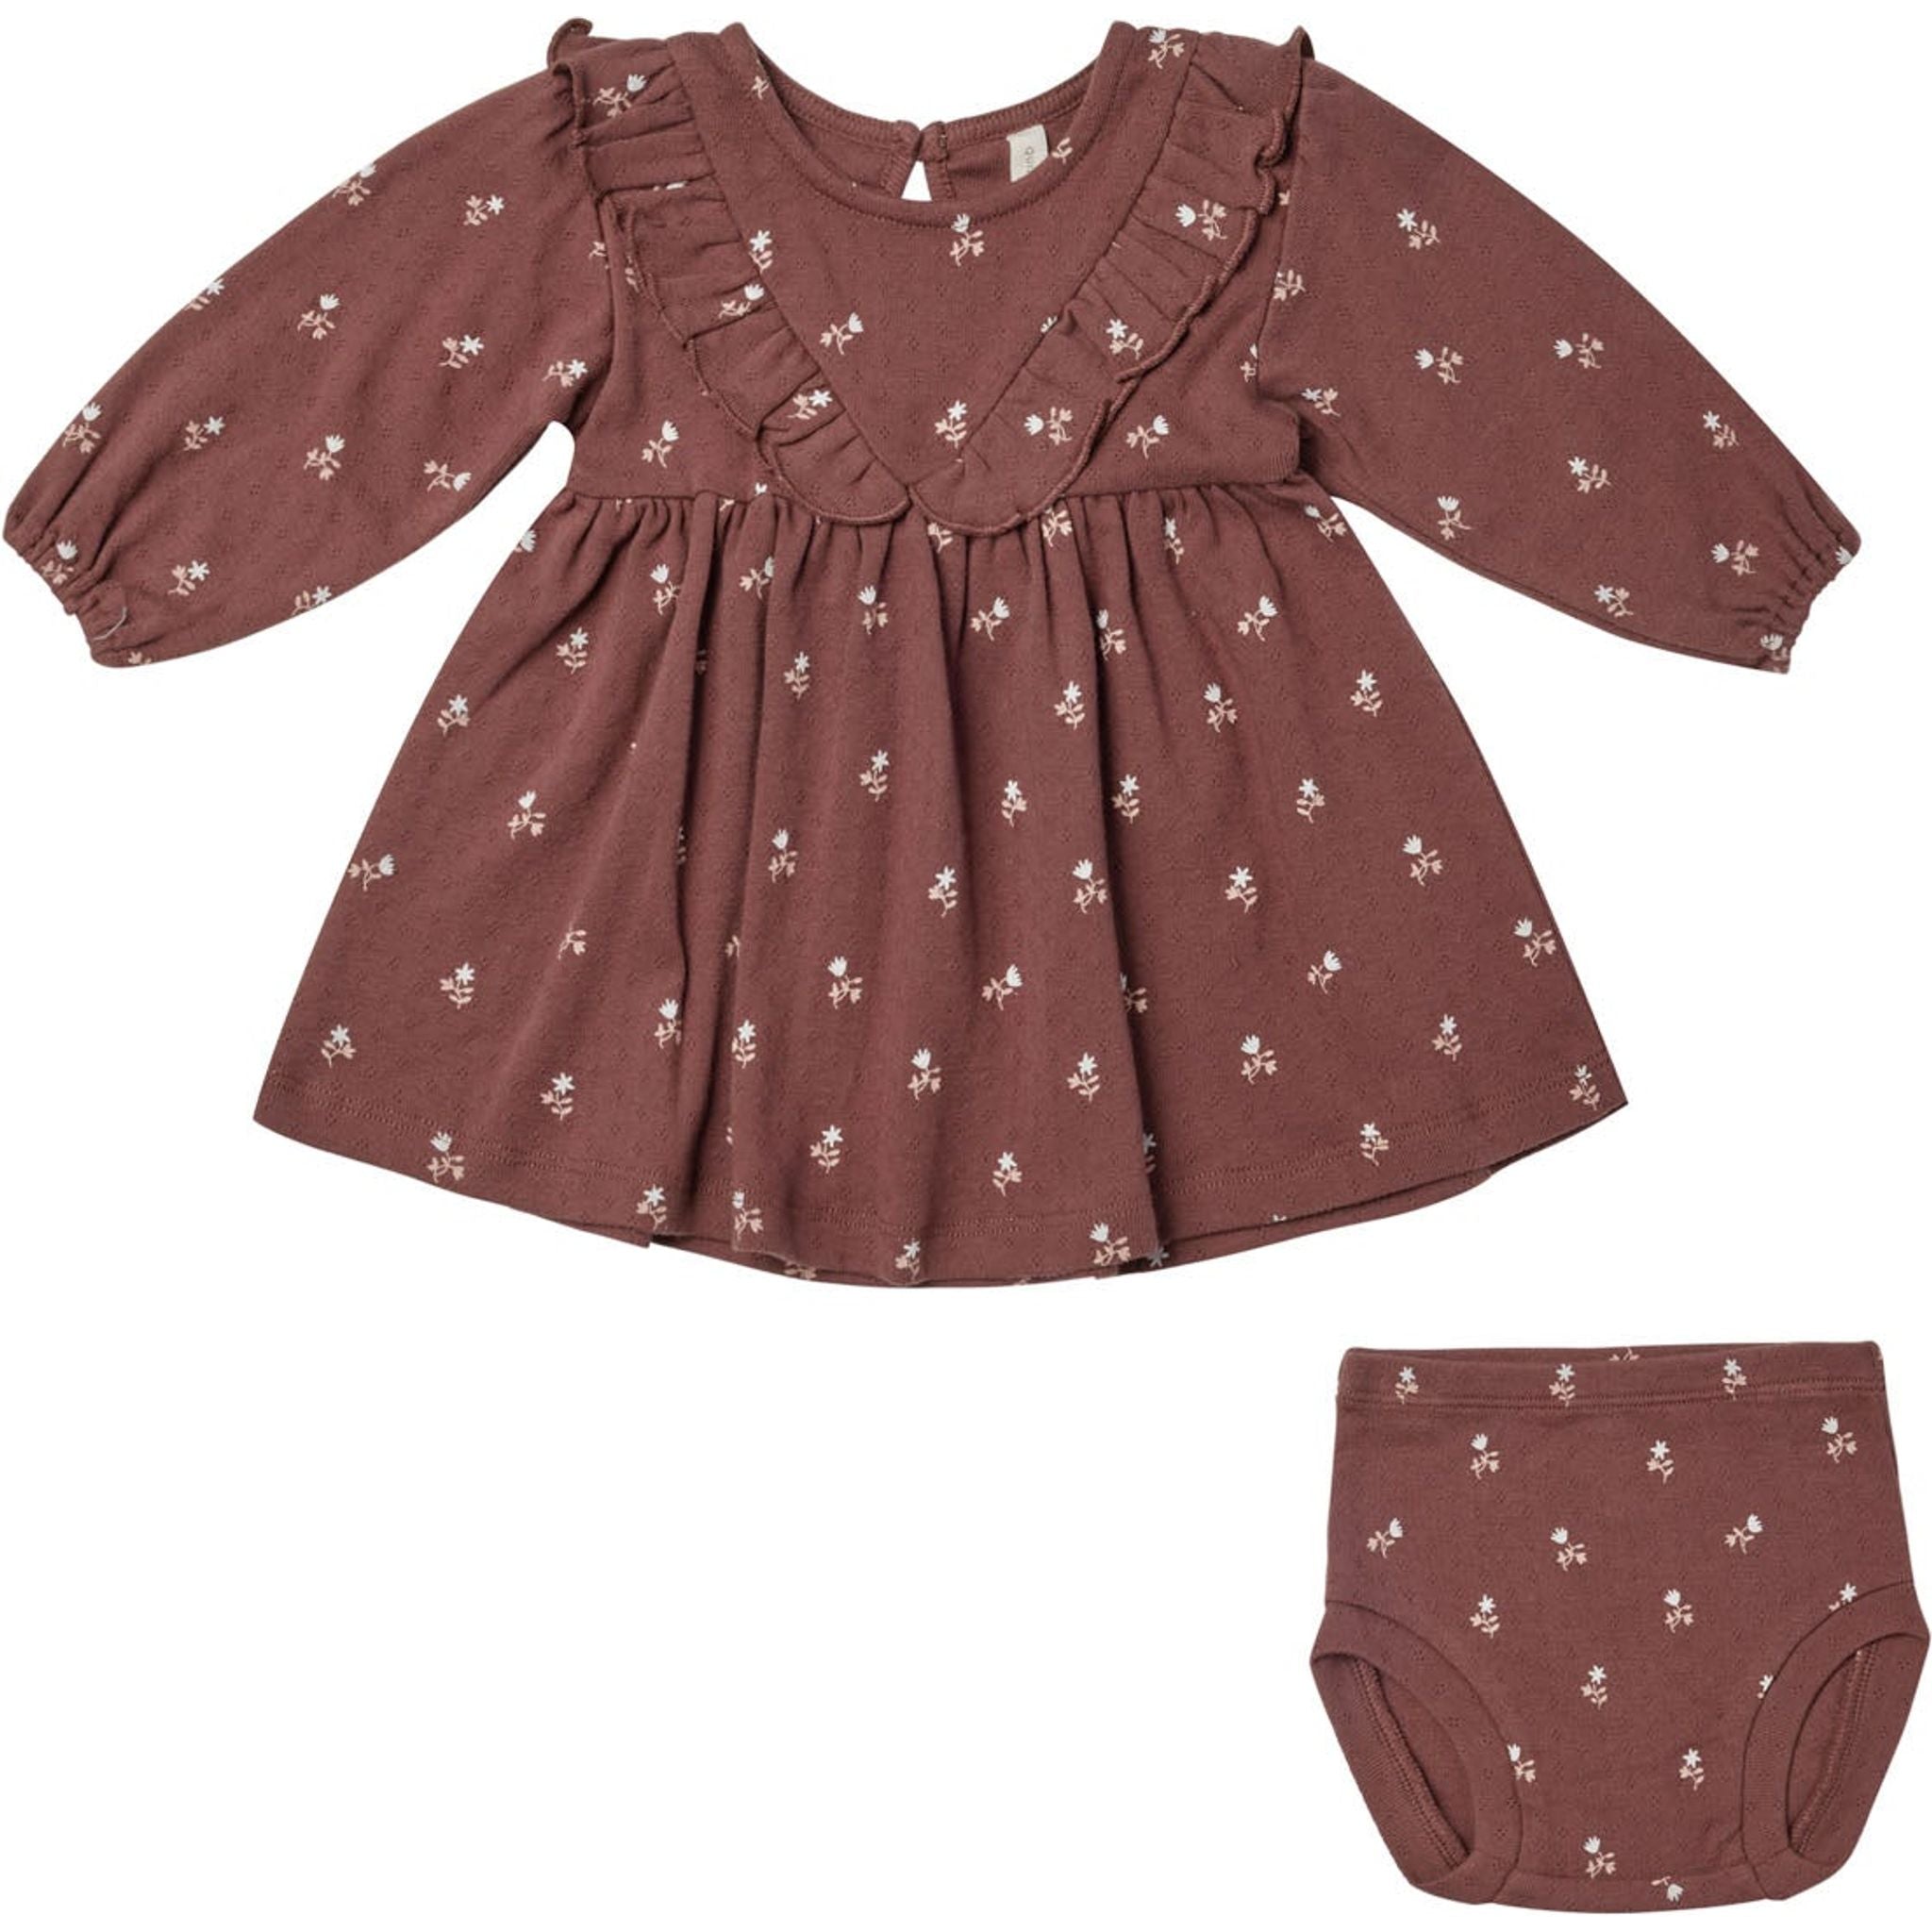 long sleeve dress with fleur print and ruffle V detail and matching bloomers